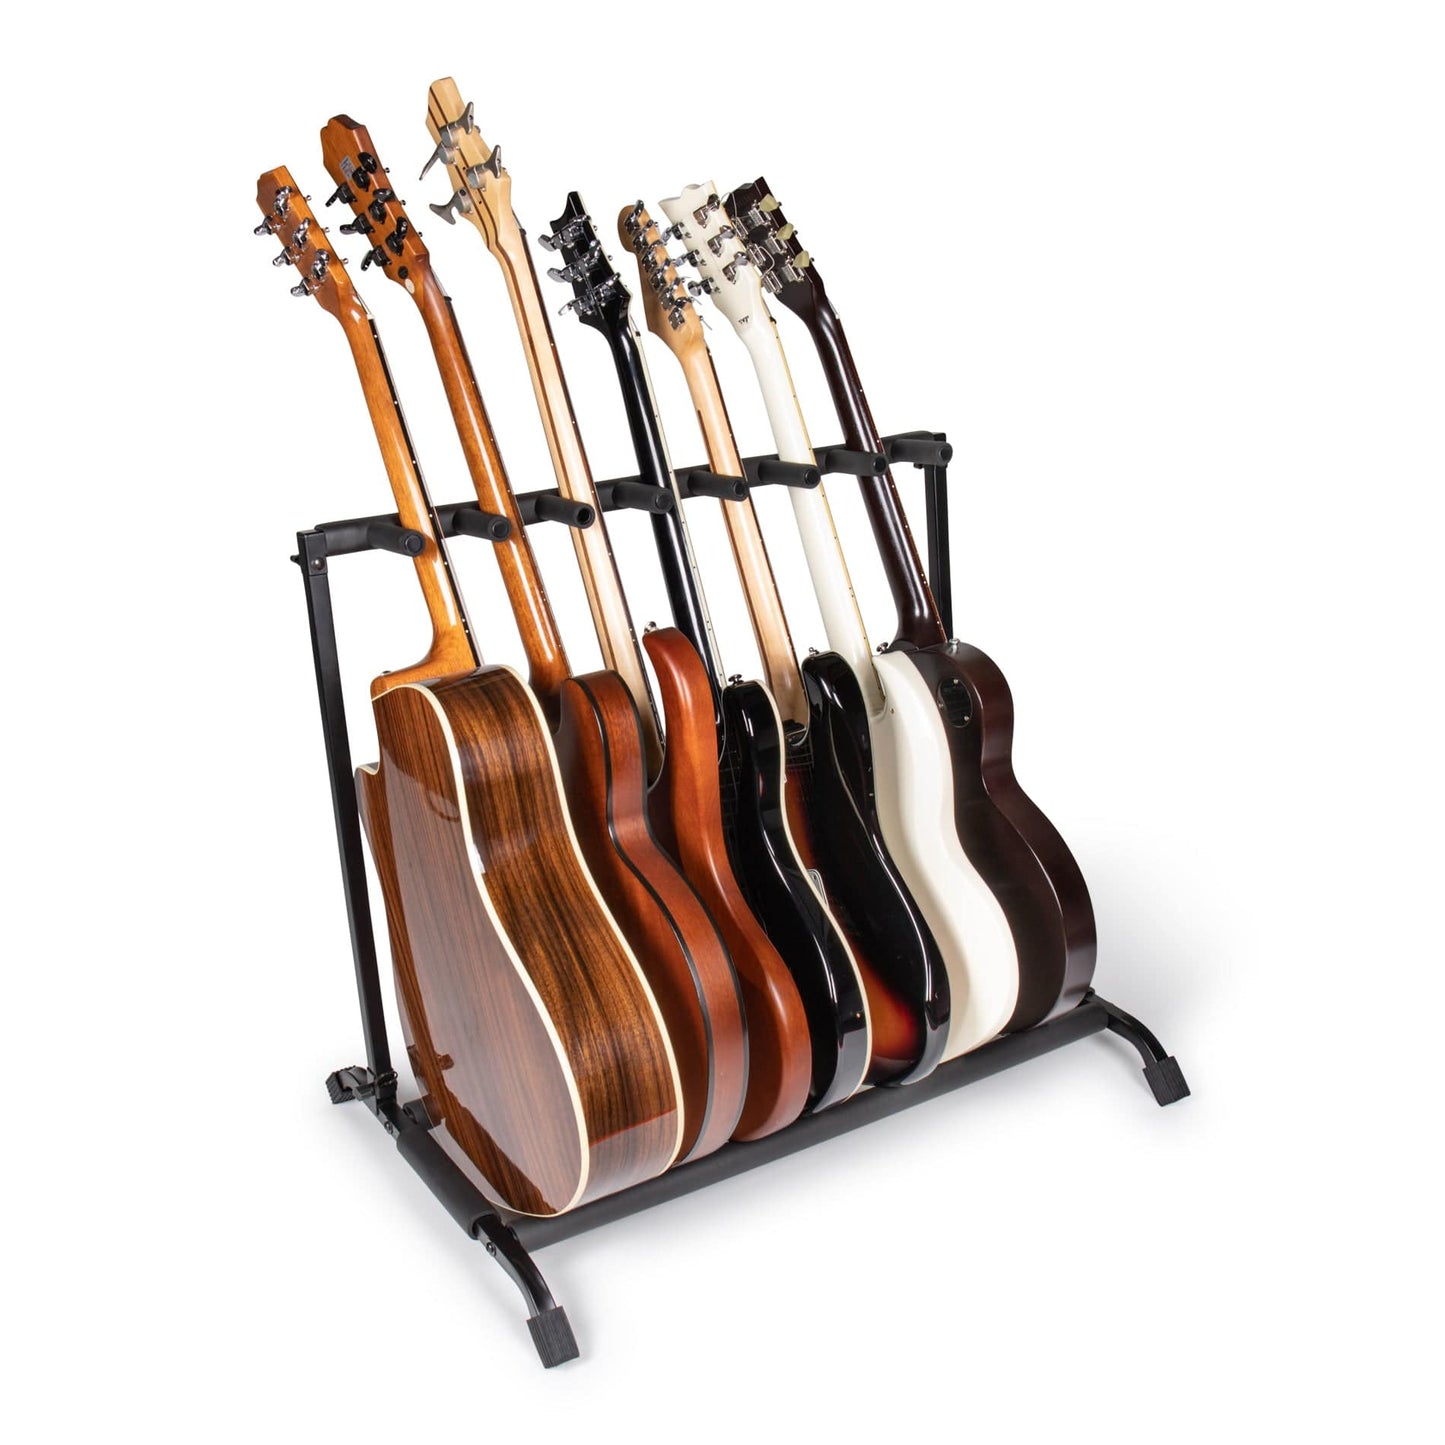 Gator RI-GTR-RACK7 Rok-It Collapsible 7-Space Guitar Rack - PSSL ProSound and Stage Lighting